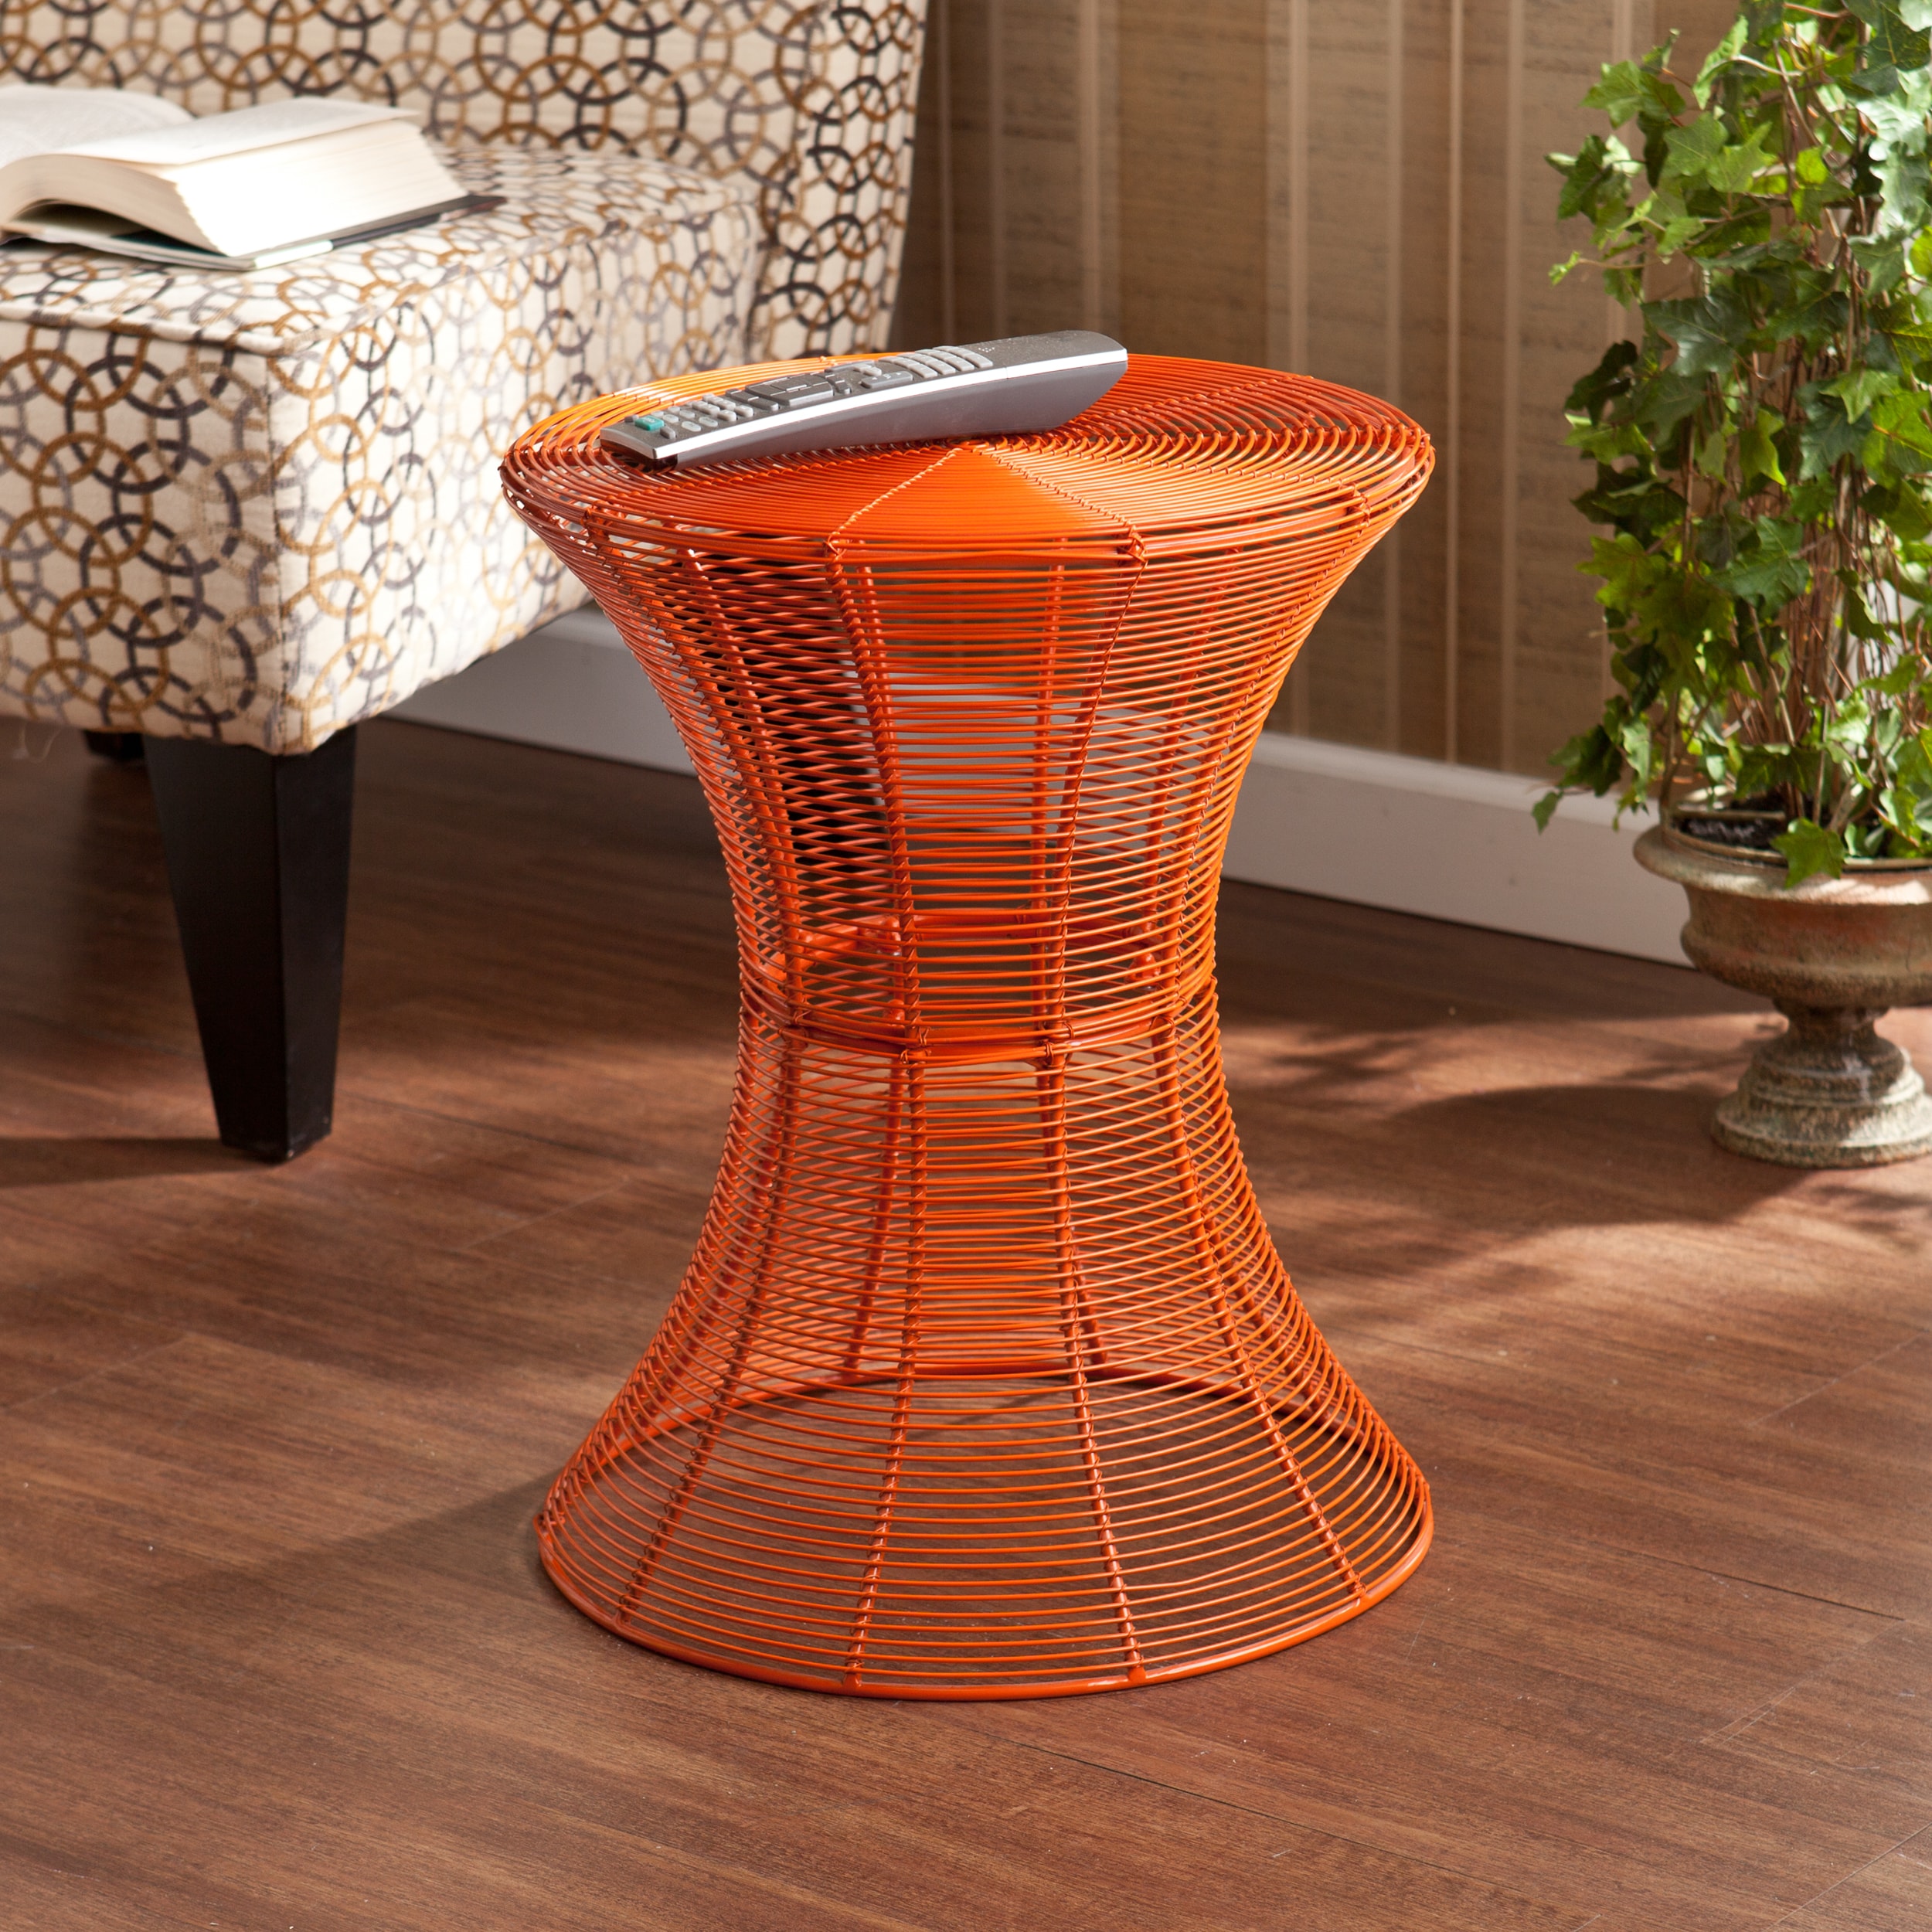 Orange Coffee Table Decor - Impeccable Coffee Table Décor For Your